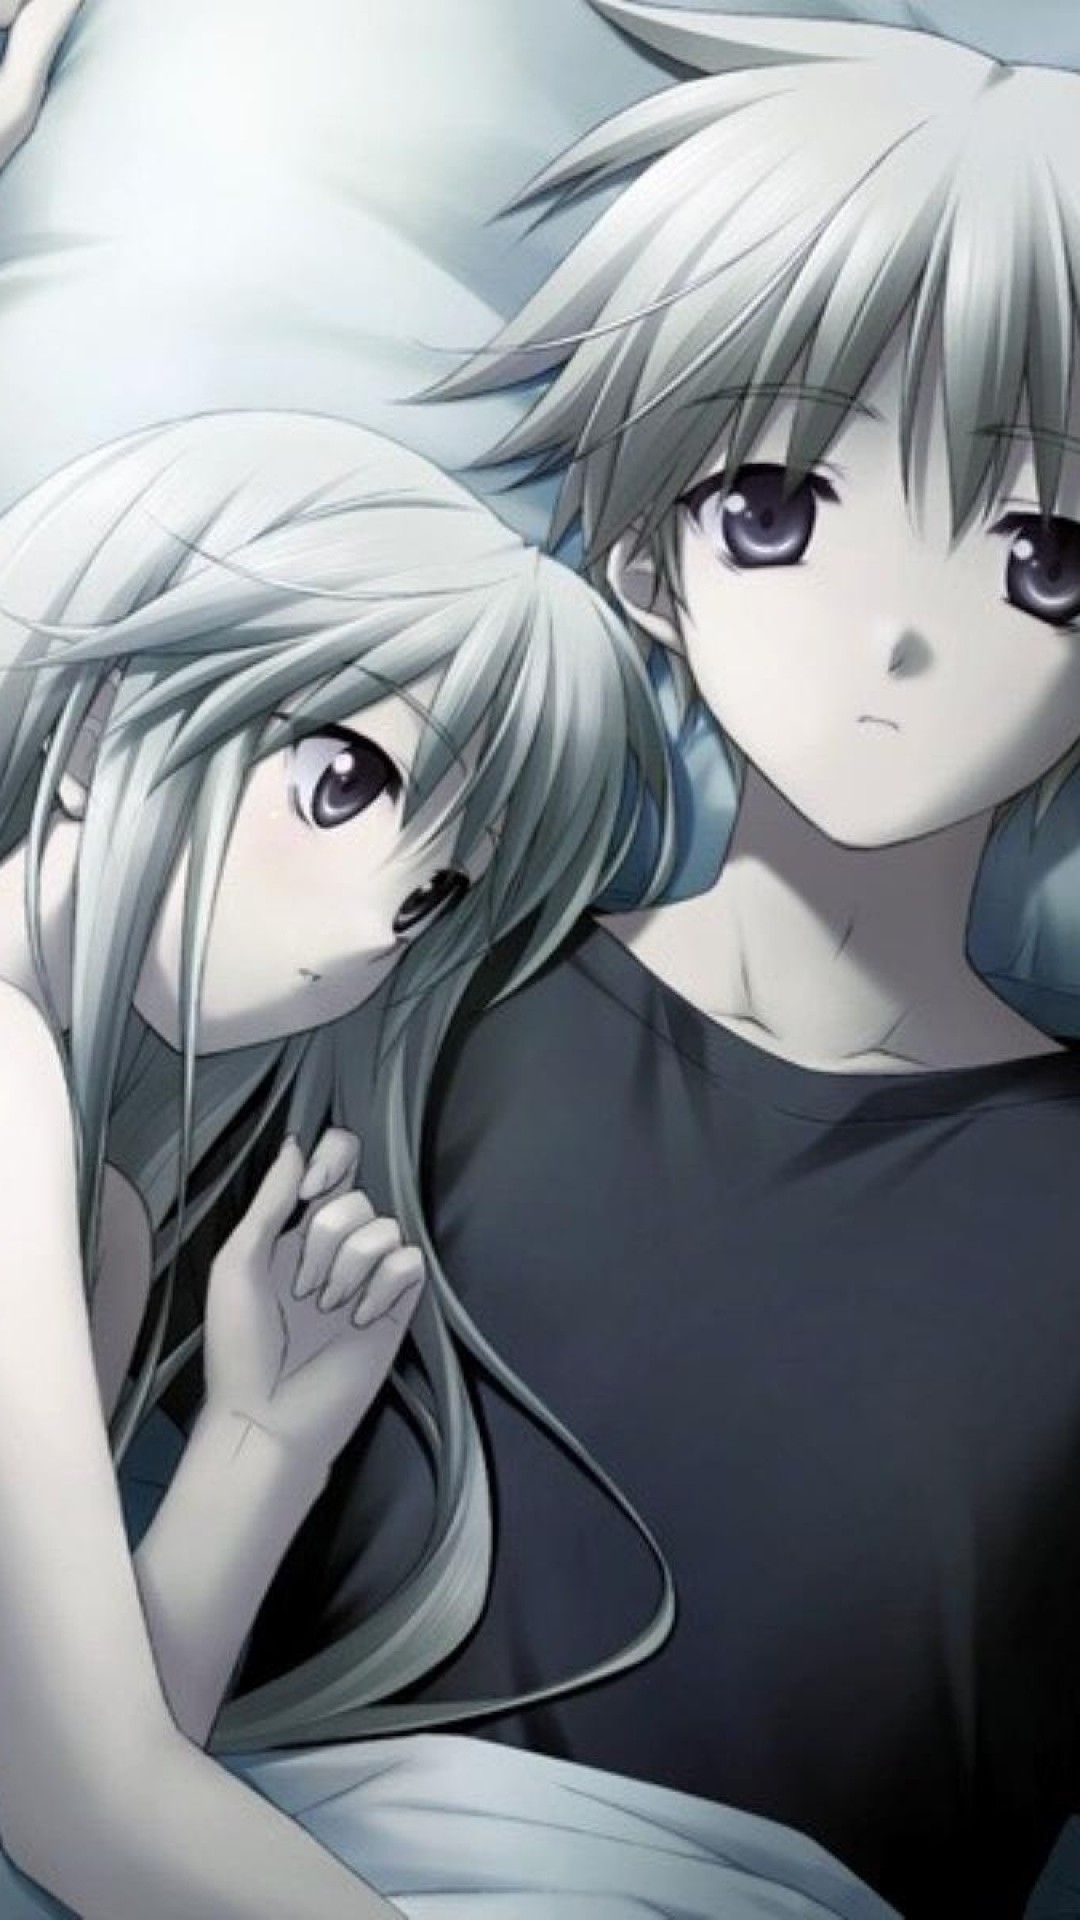 The 17 Cutest Anime Couples That Won My Heart